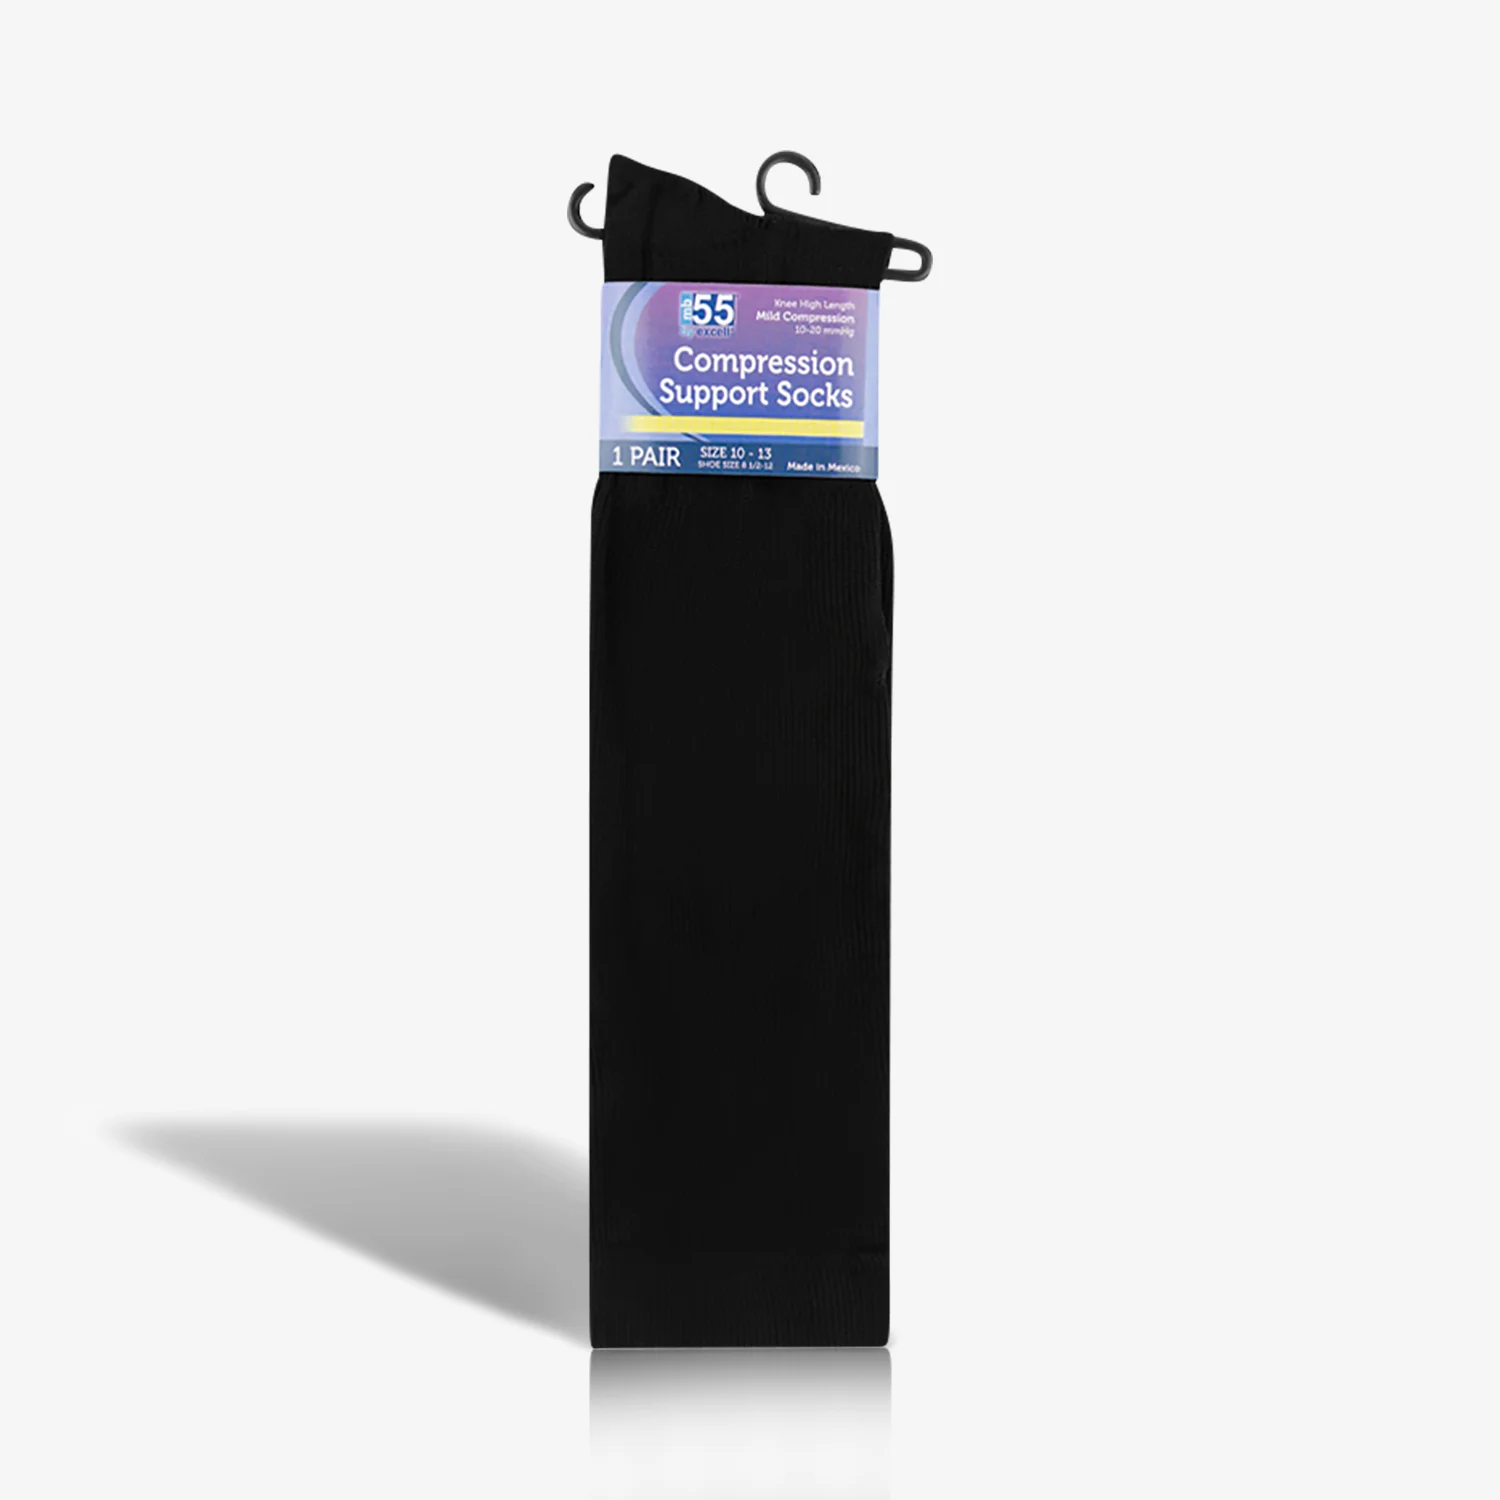 A 2 Pack Mod and Tone Men's 10-20 MMHG Health Compression Support Socks on a white background.